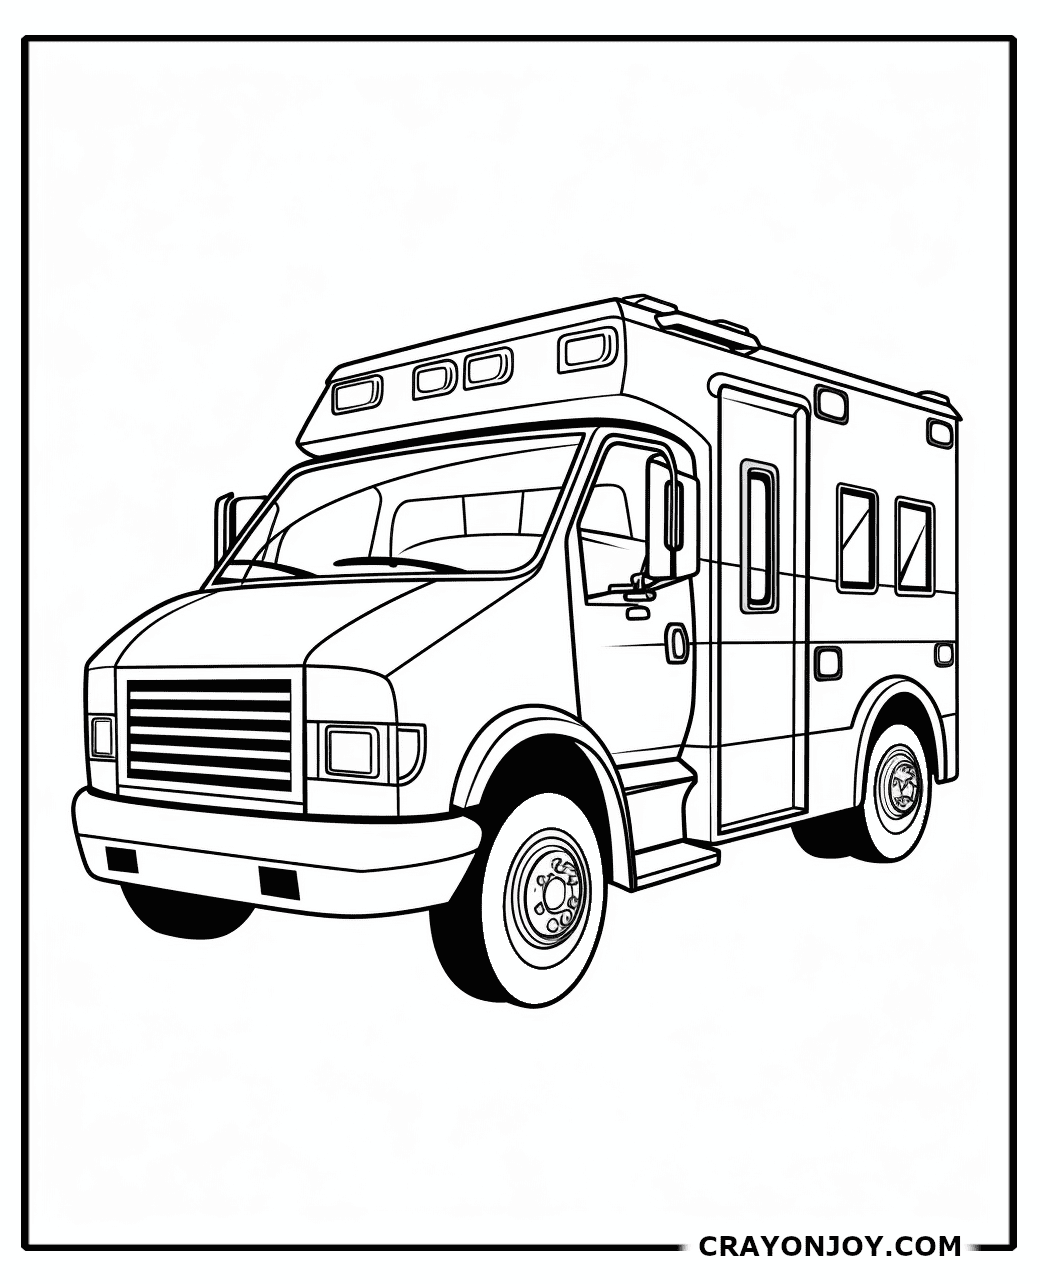 Free Printable Ambulance Coloring Pages for Kids and Adults